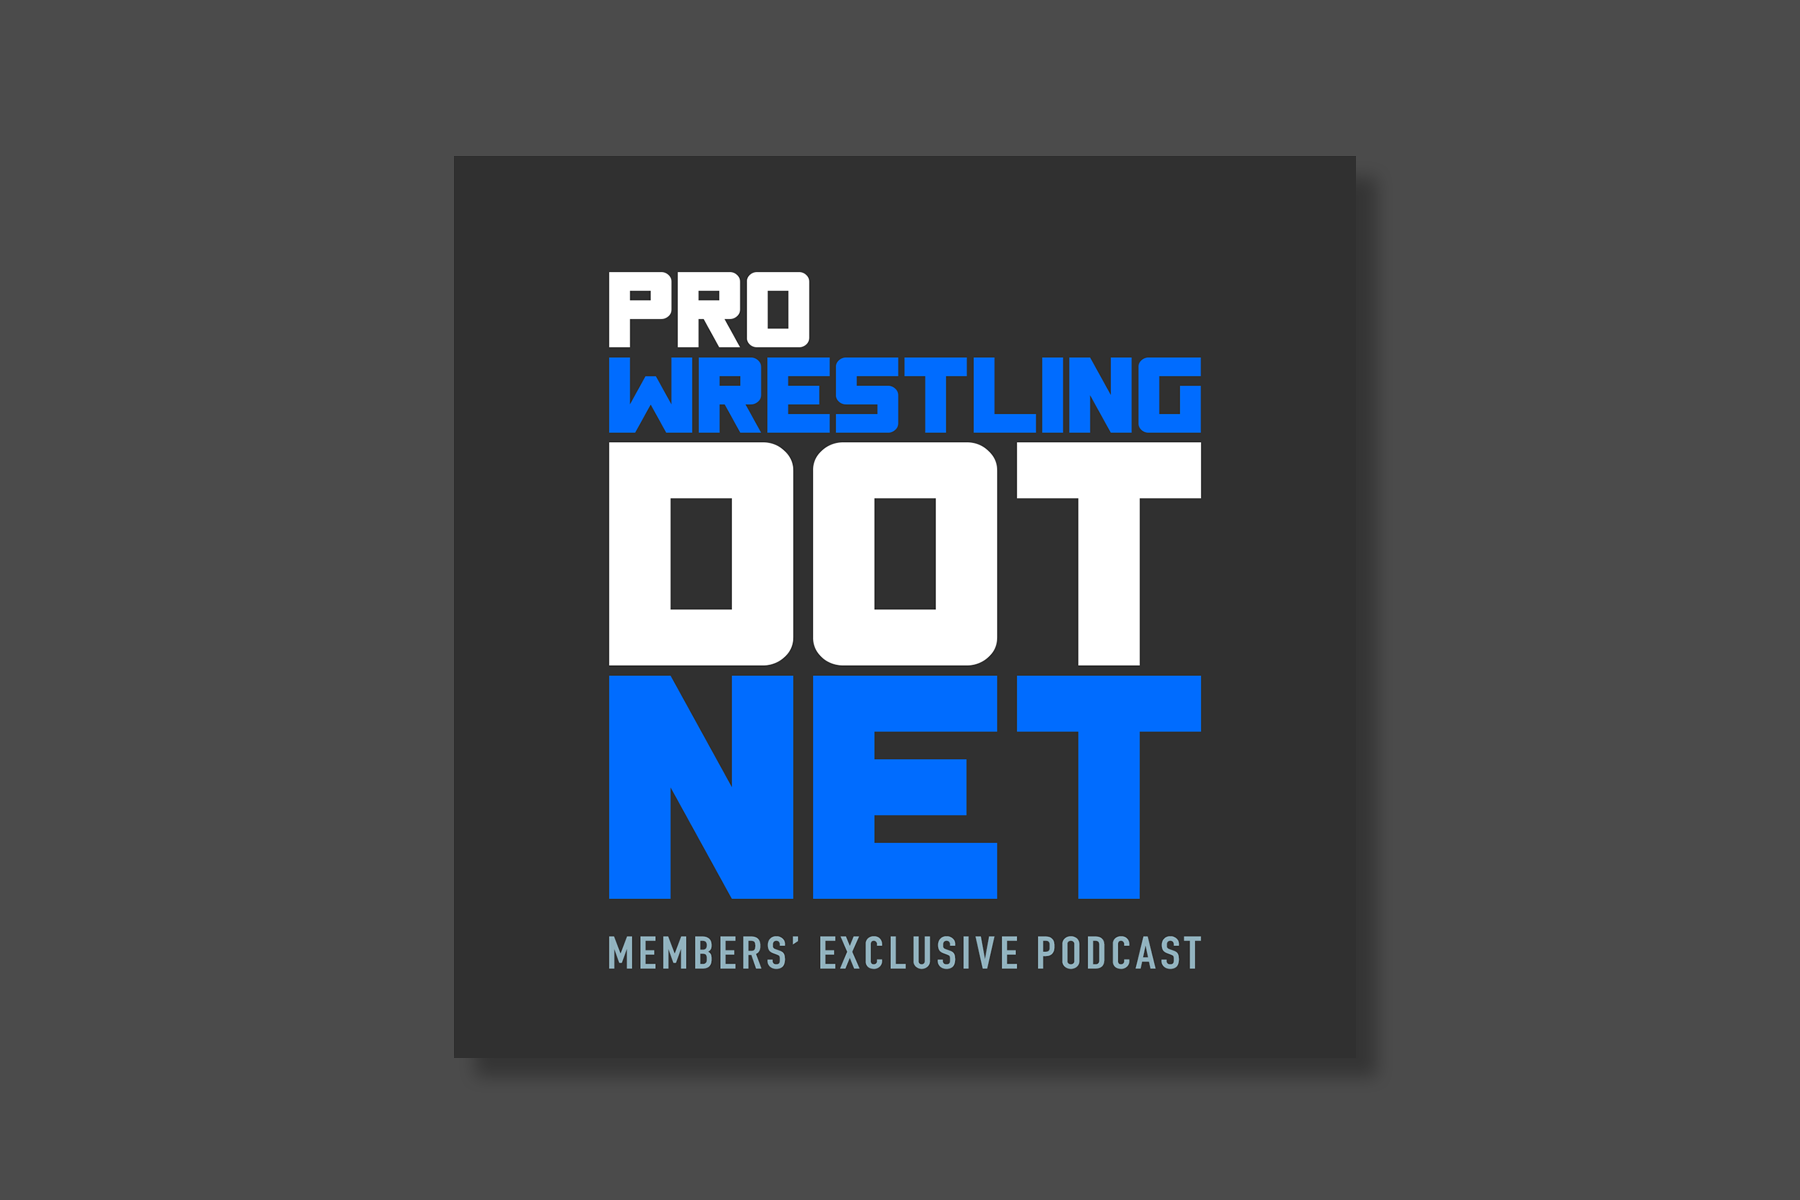 09/21 Dot Net Weekly audio show: Barnett and Powell on WWE talent cuts, Smackdown moving to USA Network, Jade Cargill, Randy Orton, Jon Moxley, Adam Cole, XFL and USFL merger, AEW Dynamite